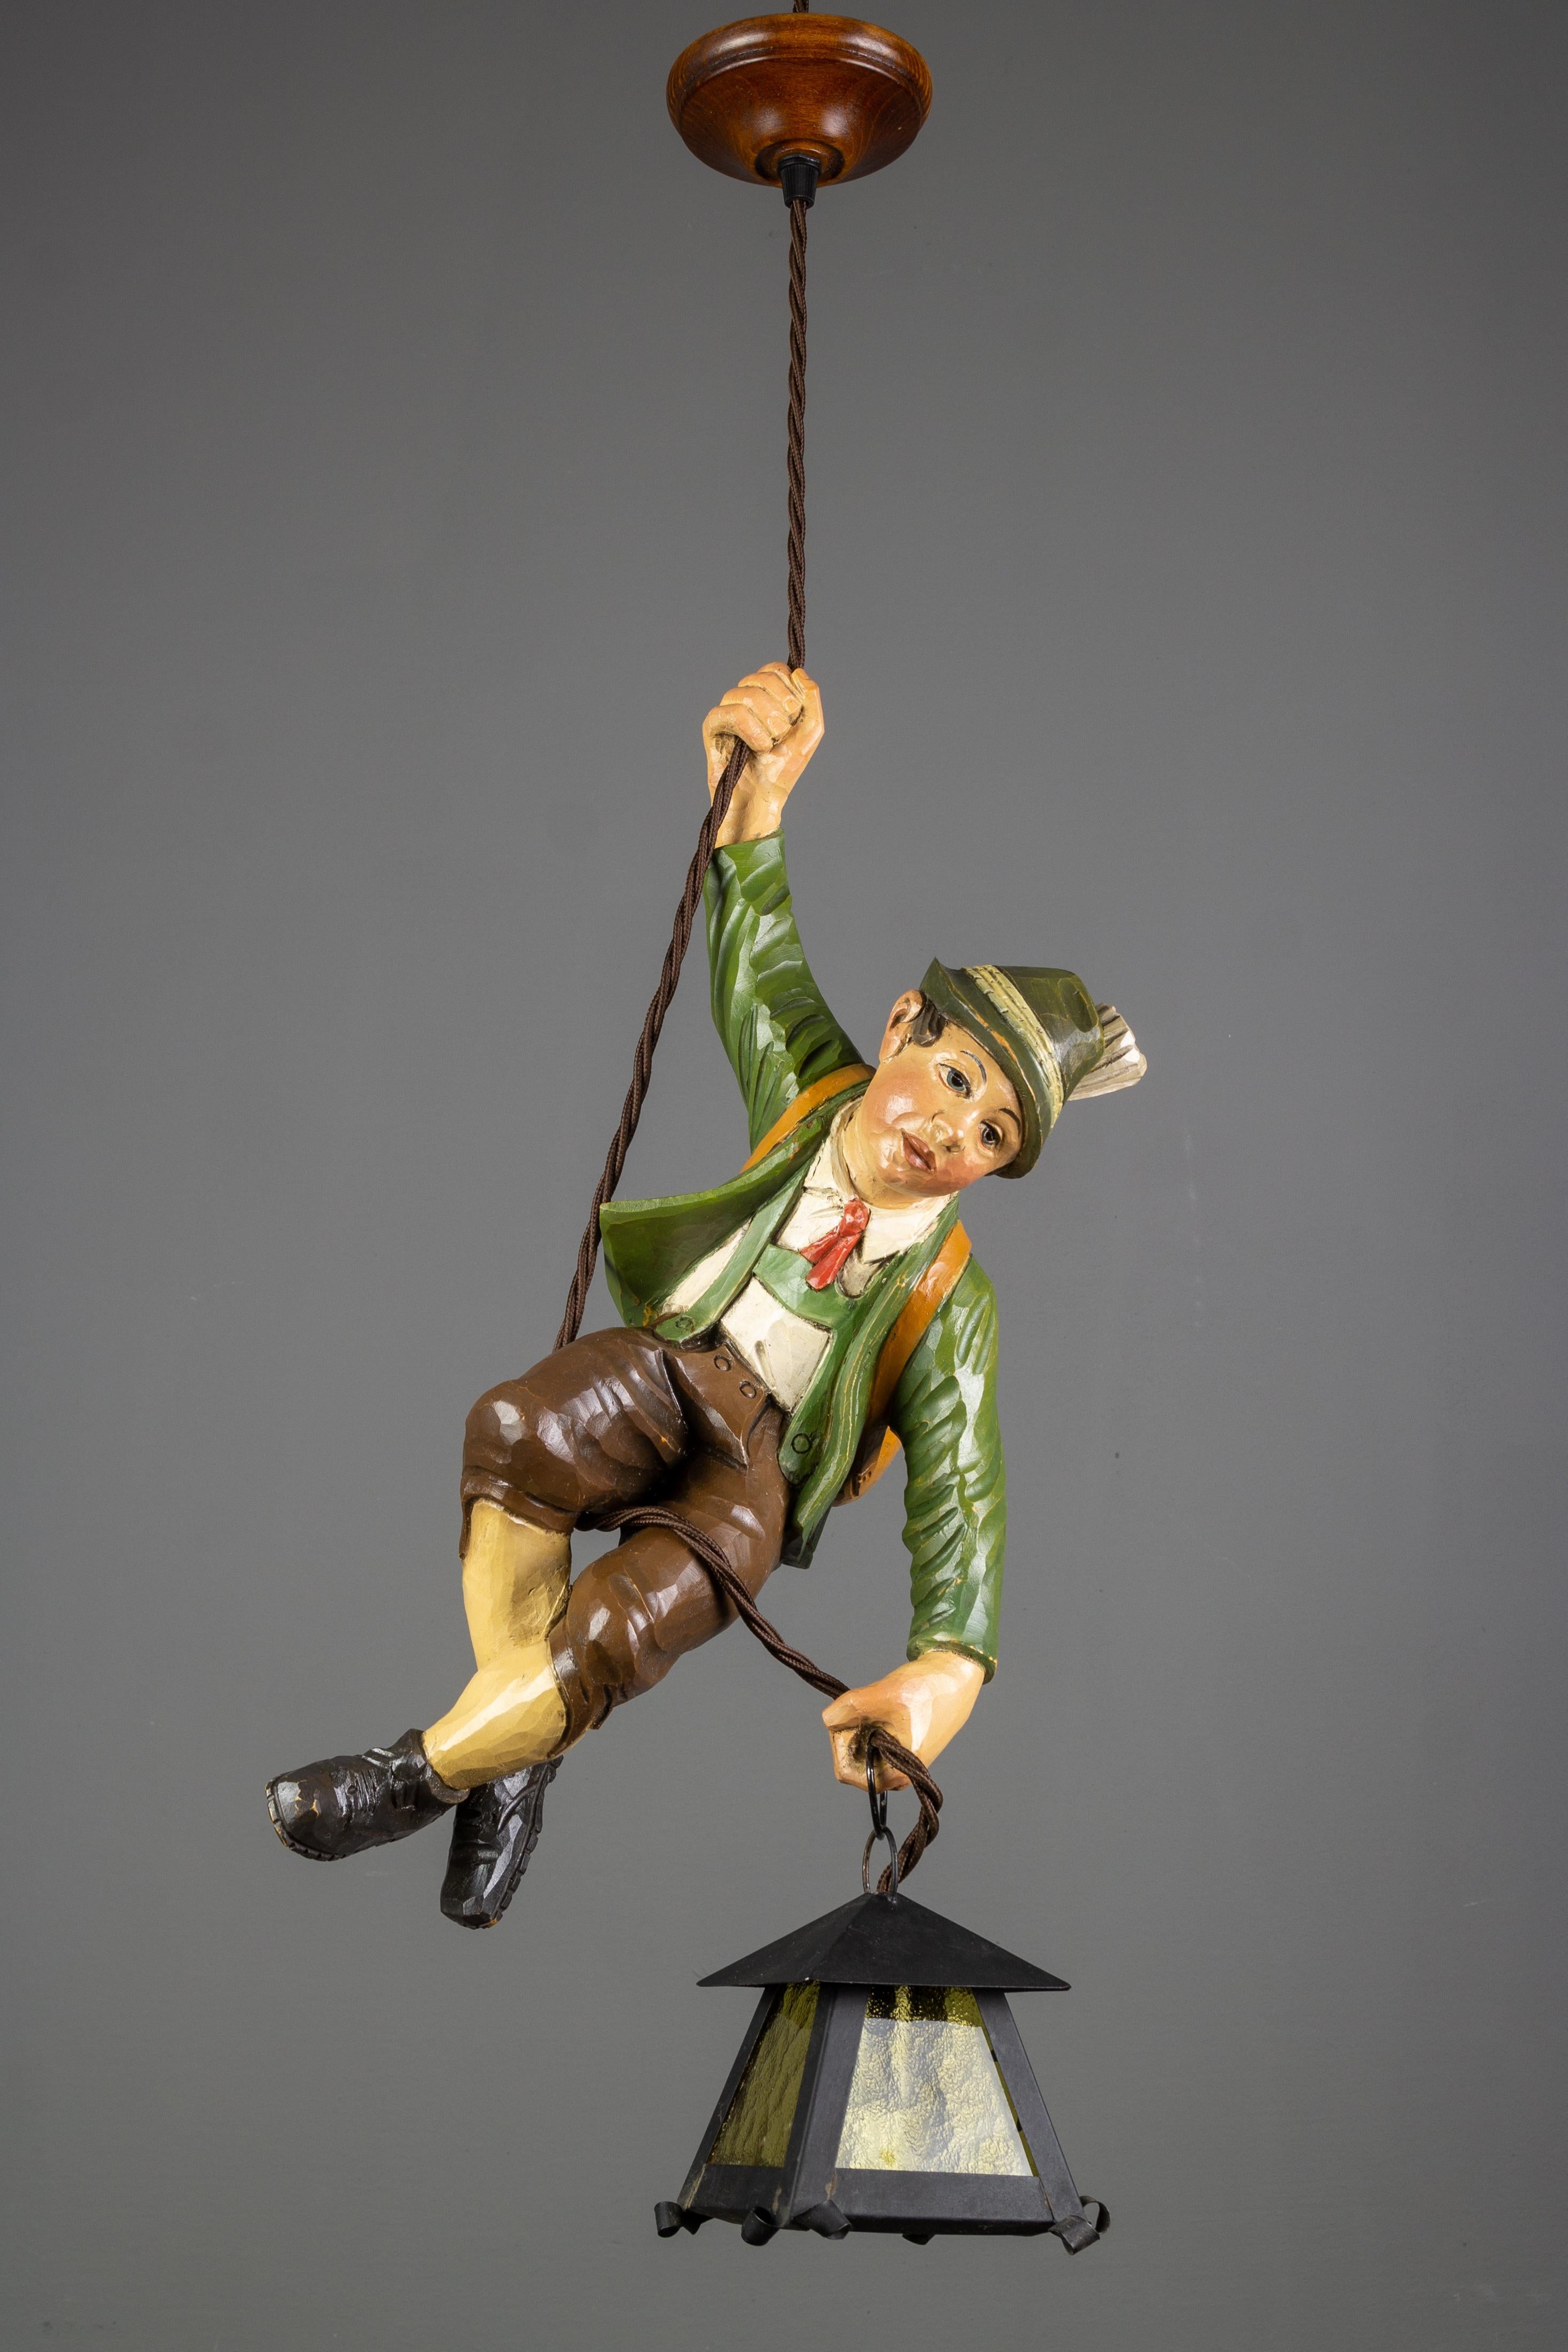 Wonderful German pendant lamp or Lüstermännchen features a hand carved figure of a mountain climber in beautifully hand painted Bavarian traditional clothing in brown, green, white, and red colors. The detailed carved wooden mountaineer wears a hat,